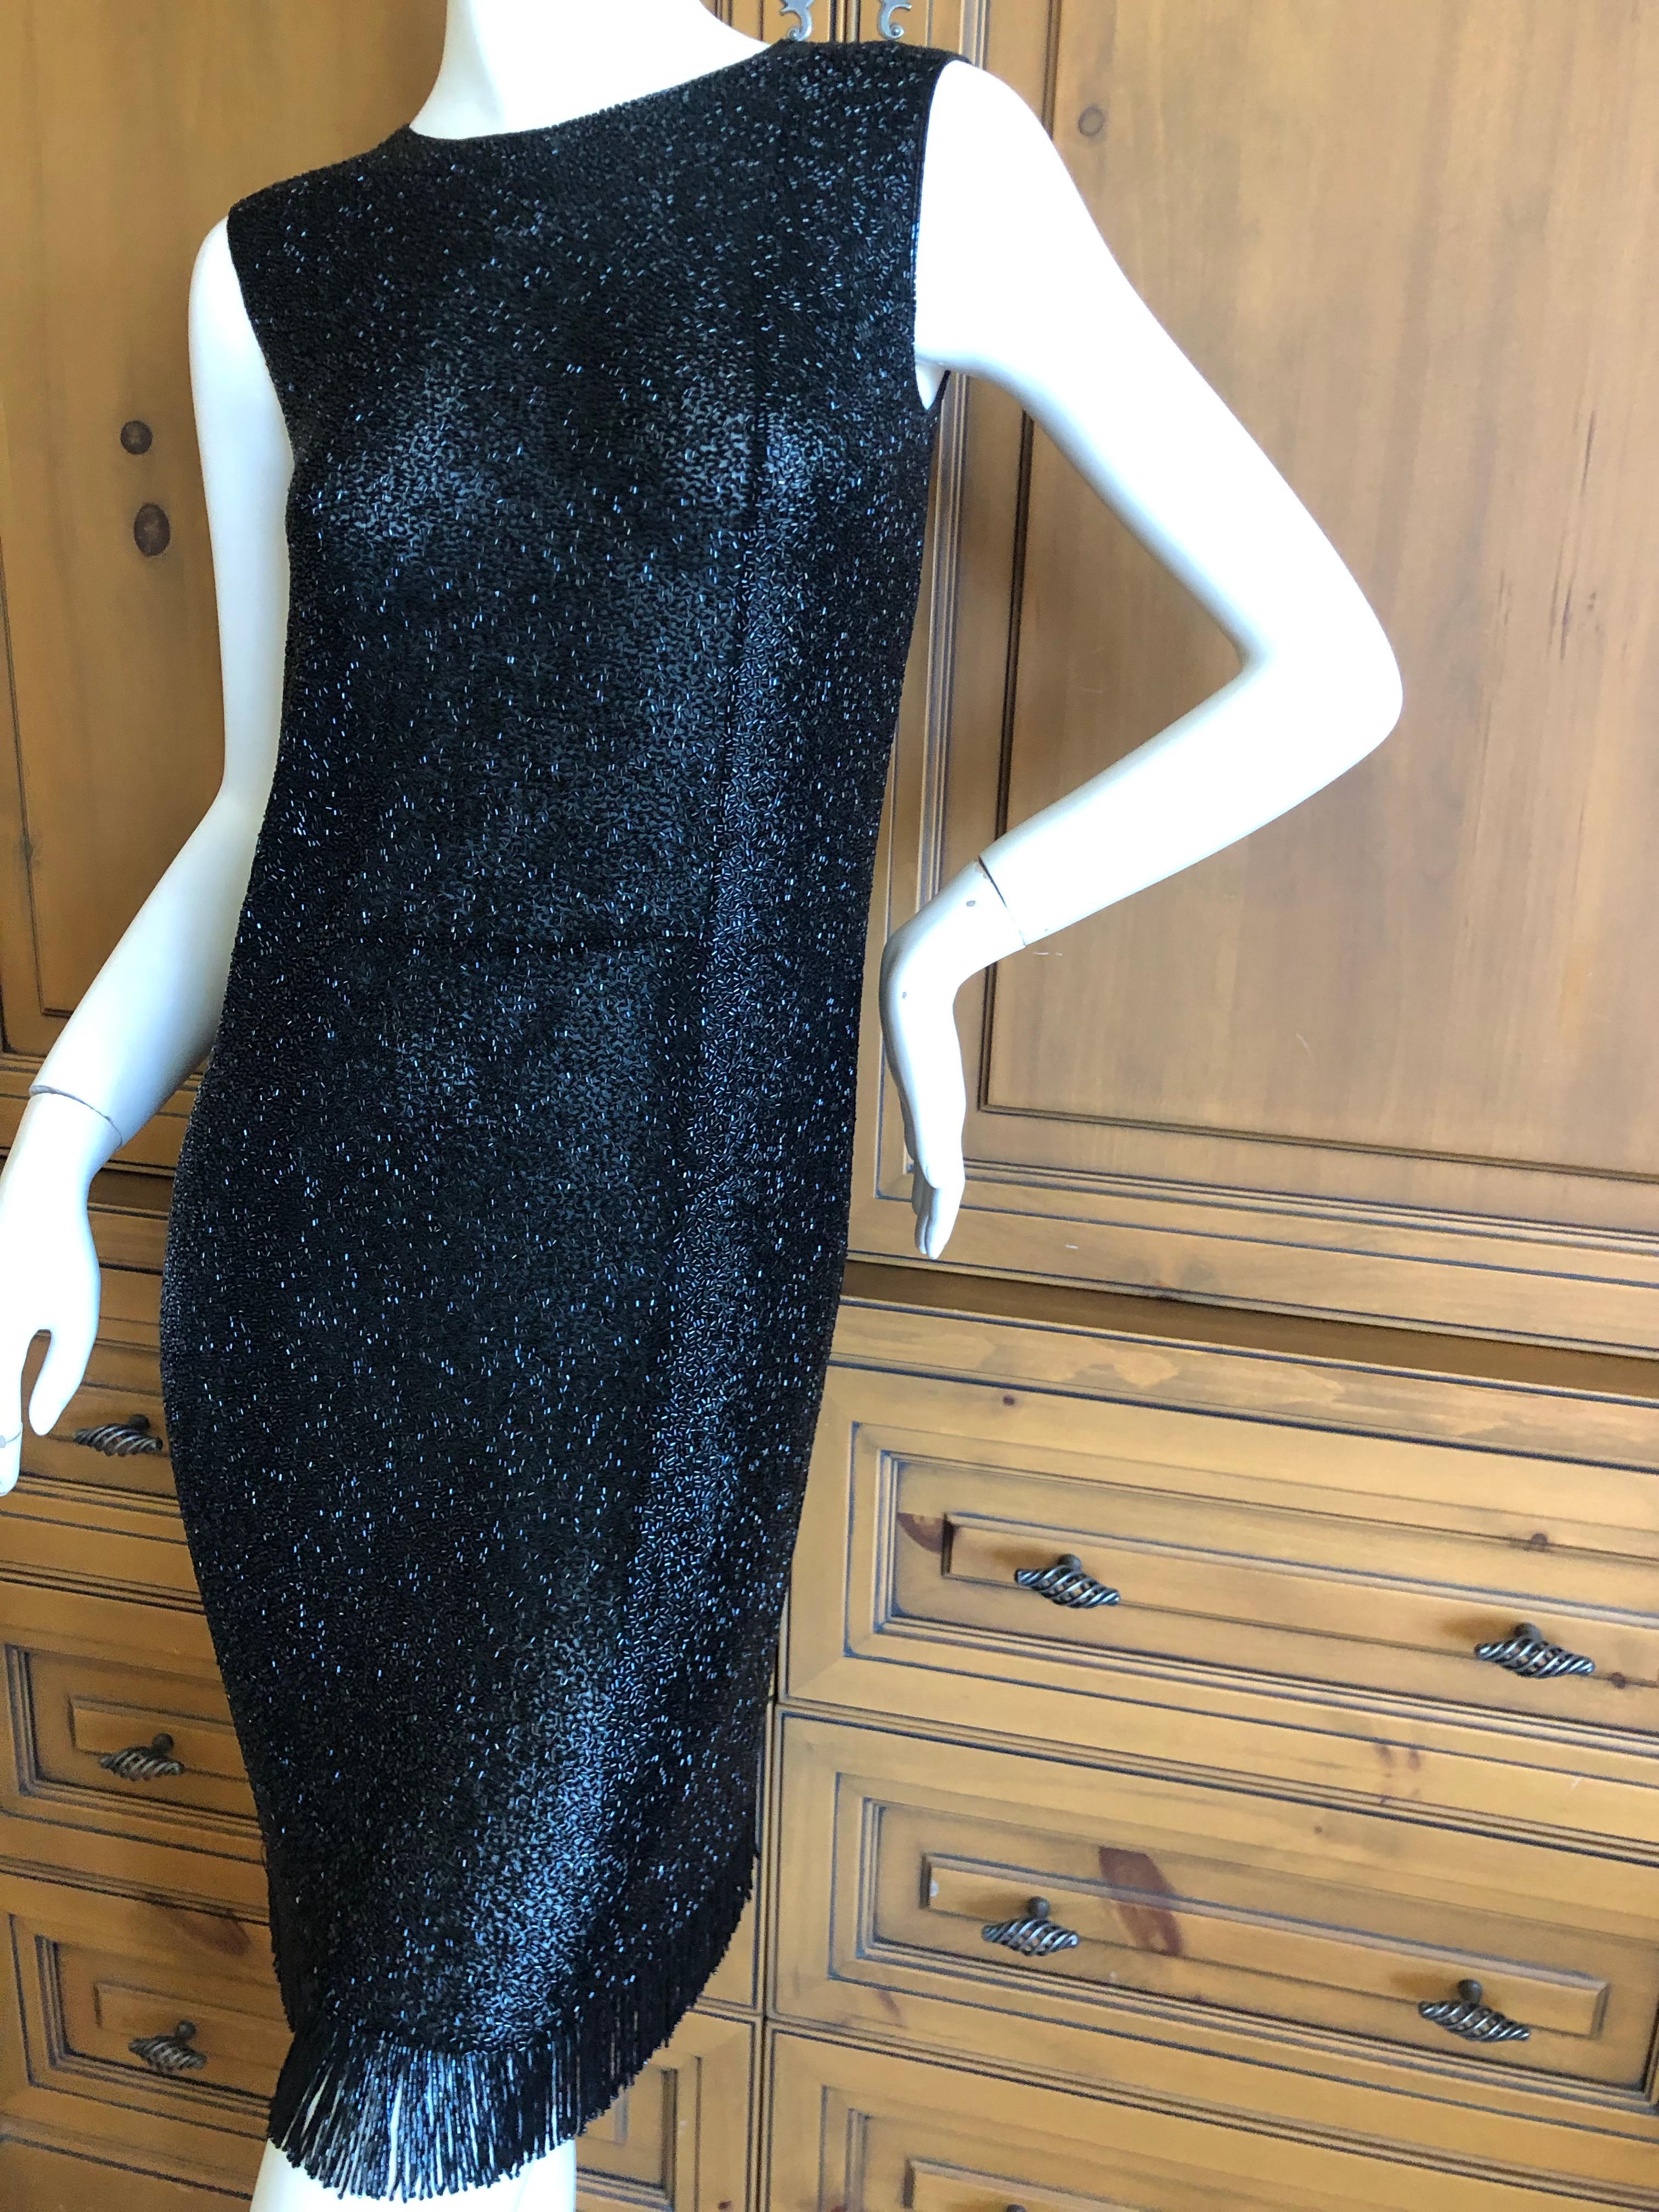 Norman Norell 1960's Black Dress Completely Embellished w Glass Beads & Fringe In Excellent Condition For Sale In Cloverdale, CA